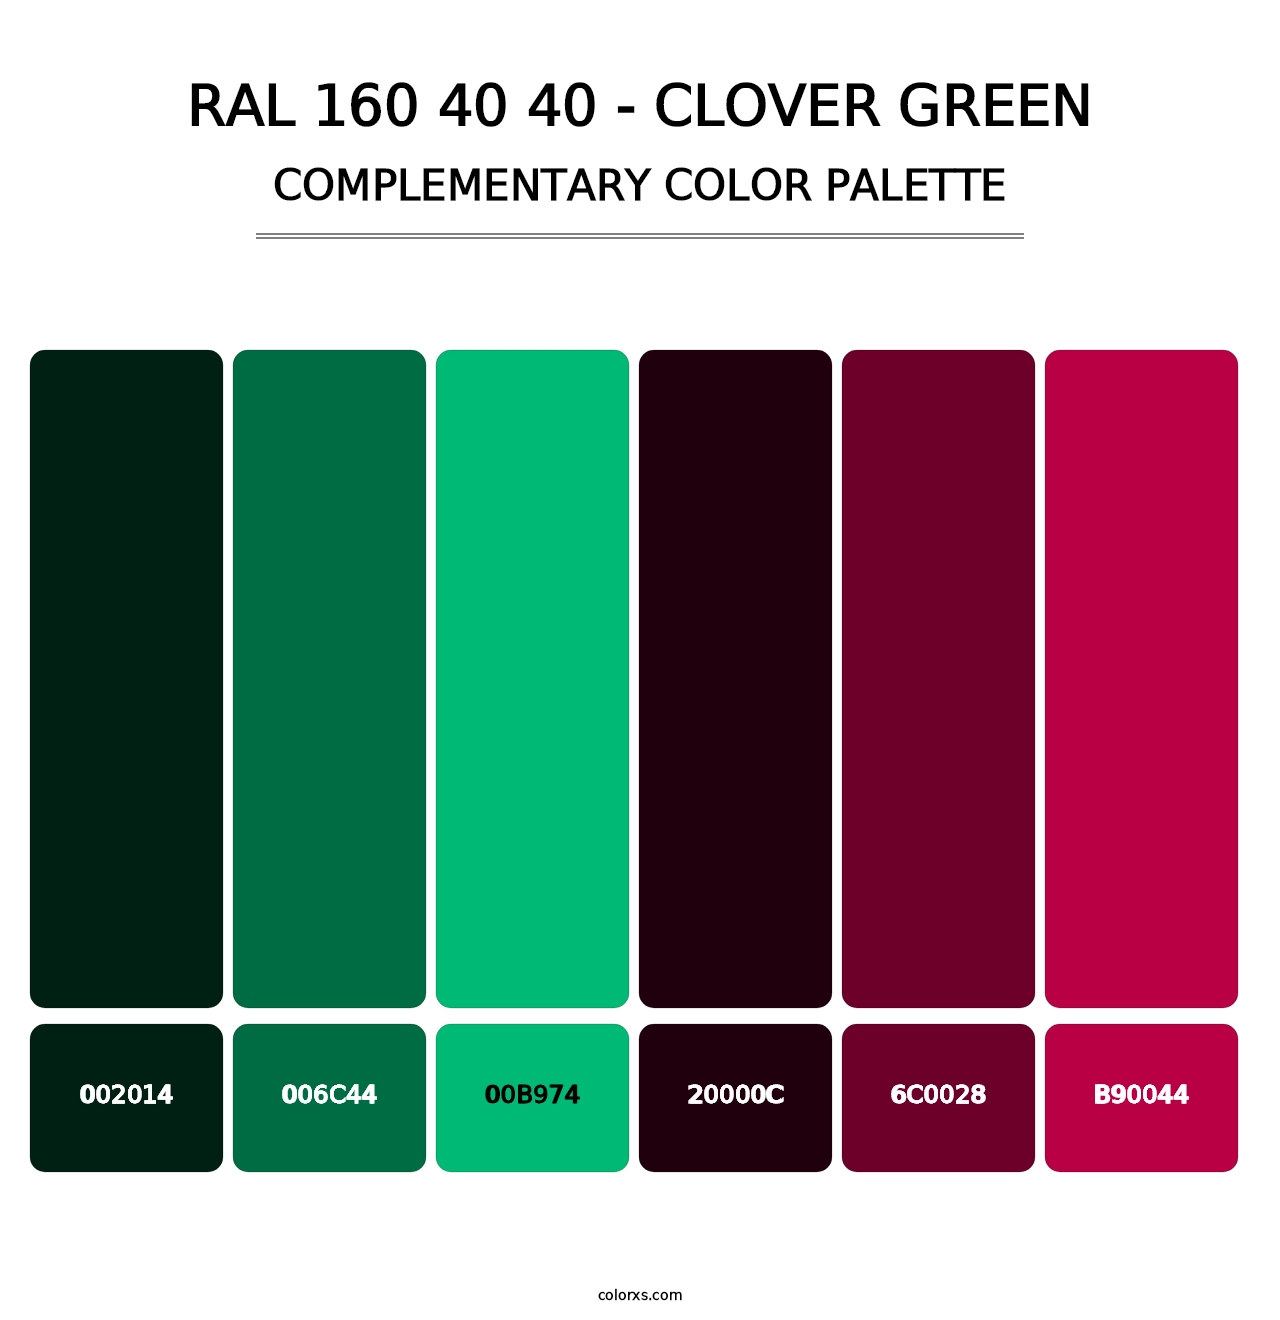 RAL 160 40 40 - Clover Green - Complementary Color Palette